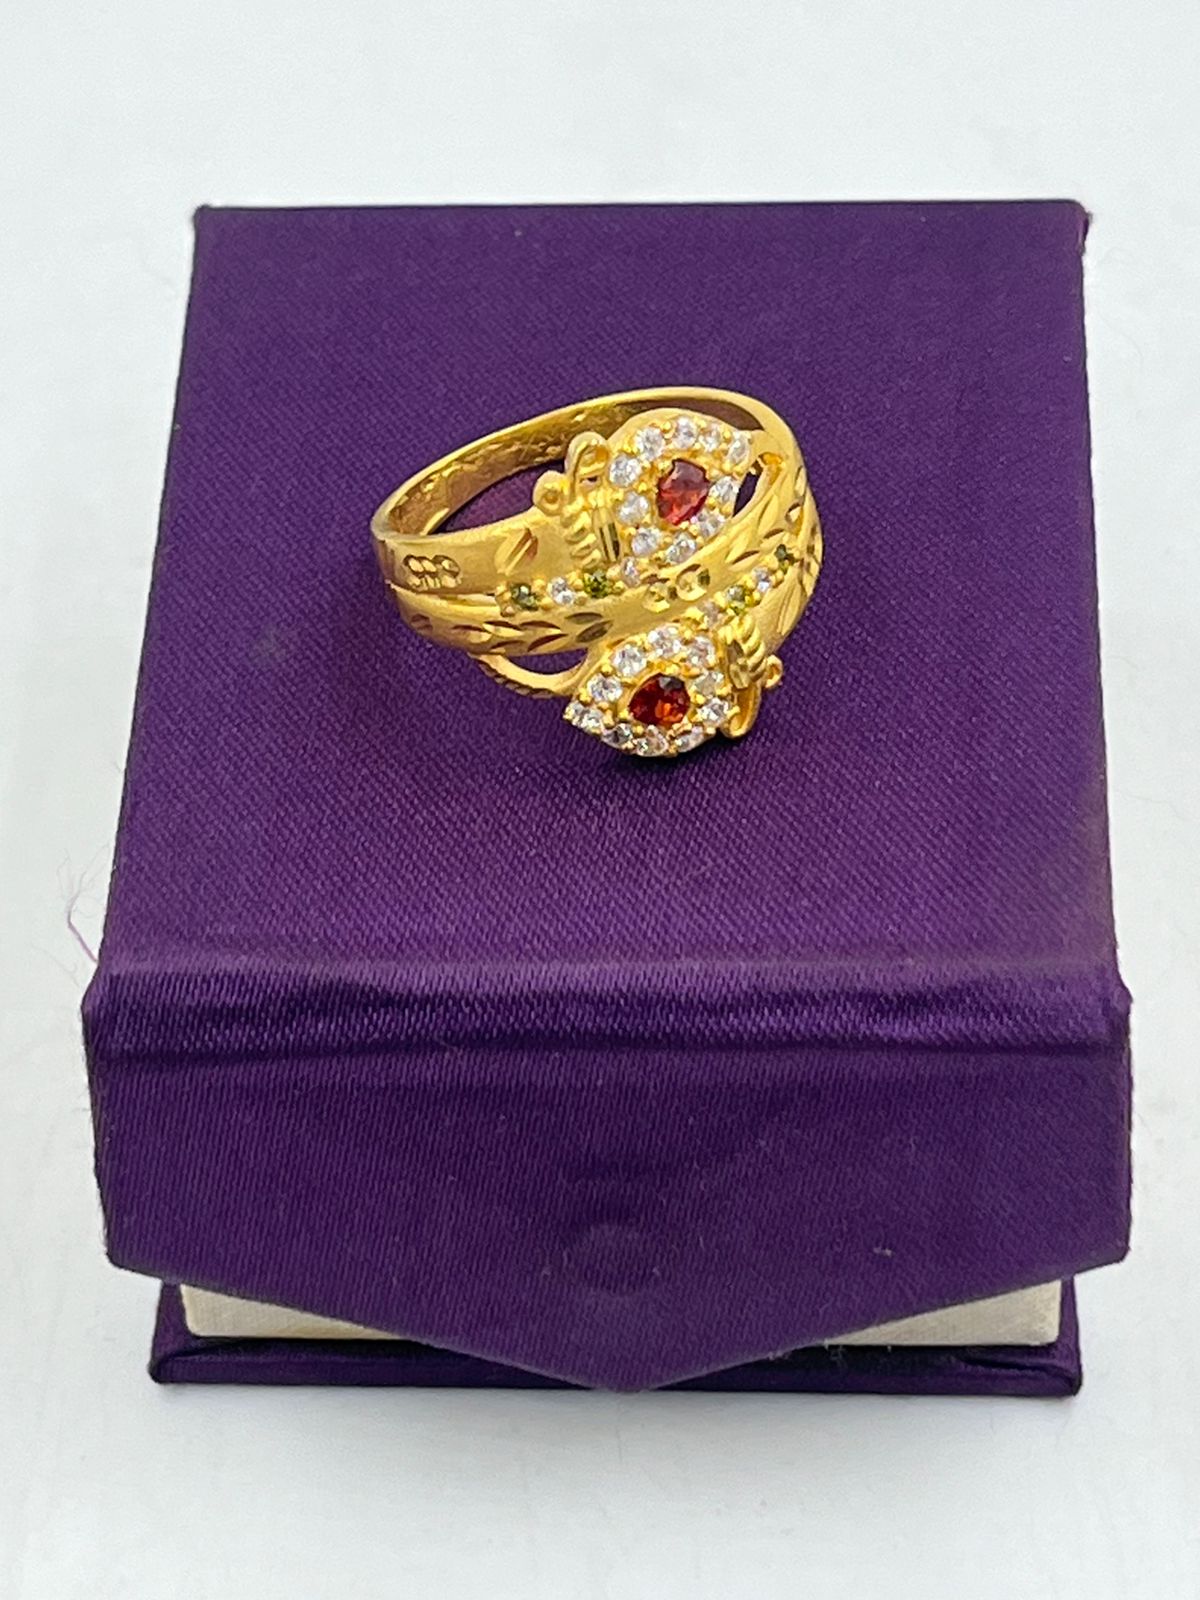 Buy Reliance Jewels 22 KT Gold Ring 5.26 g Online at Best Prices in India -  JioMart.